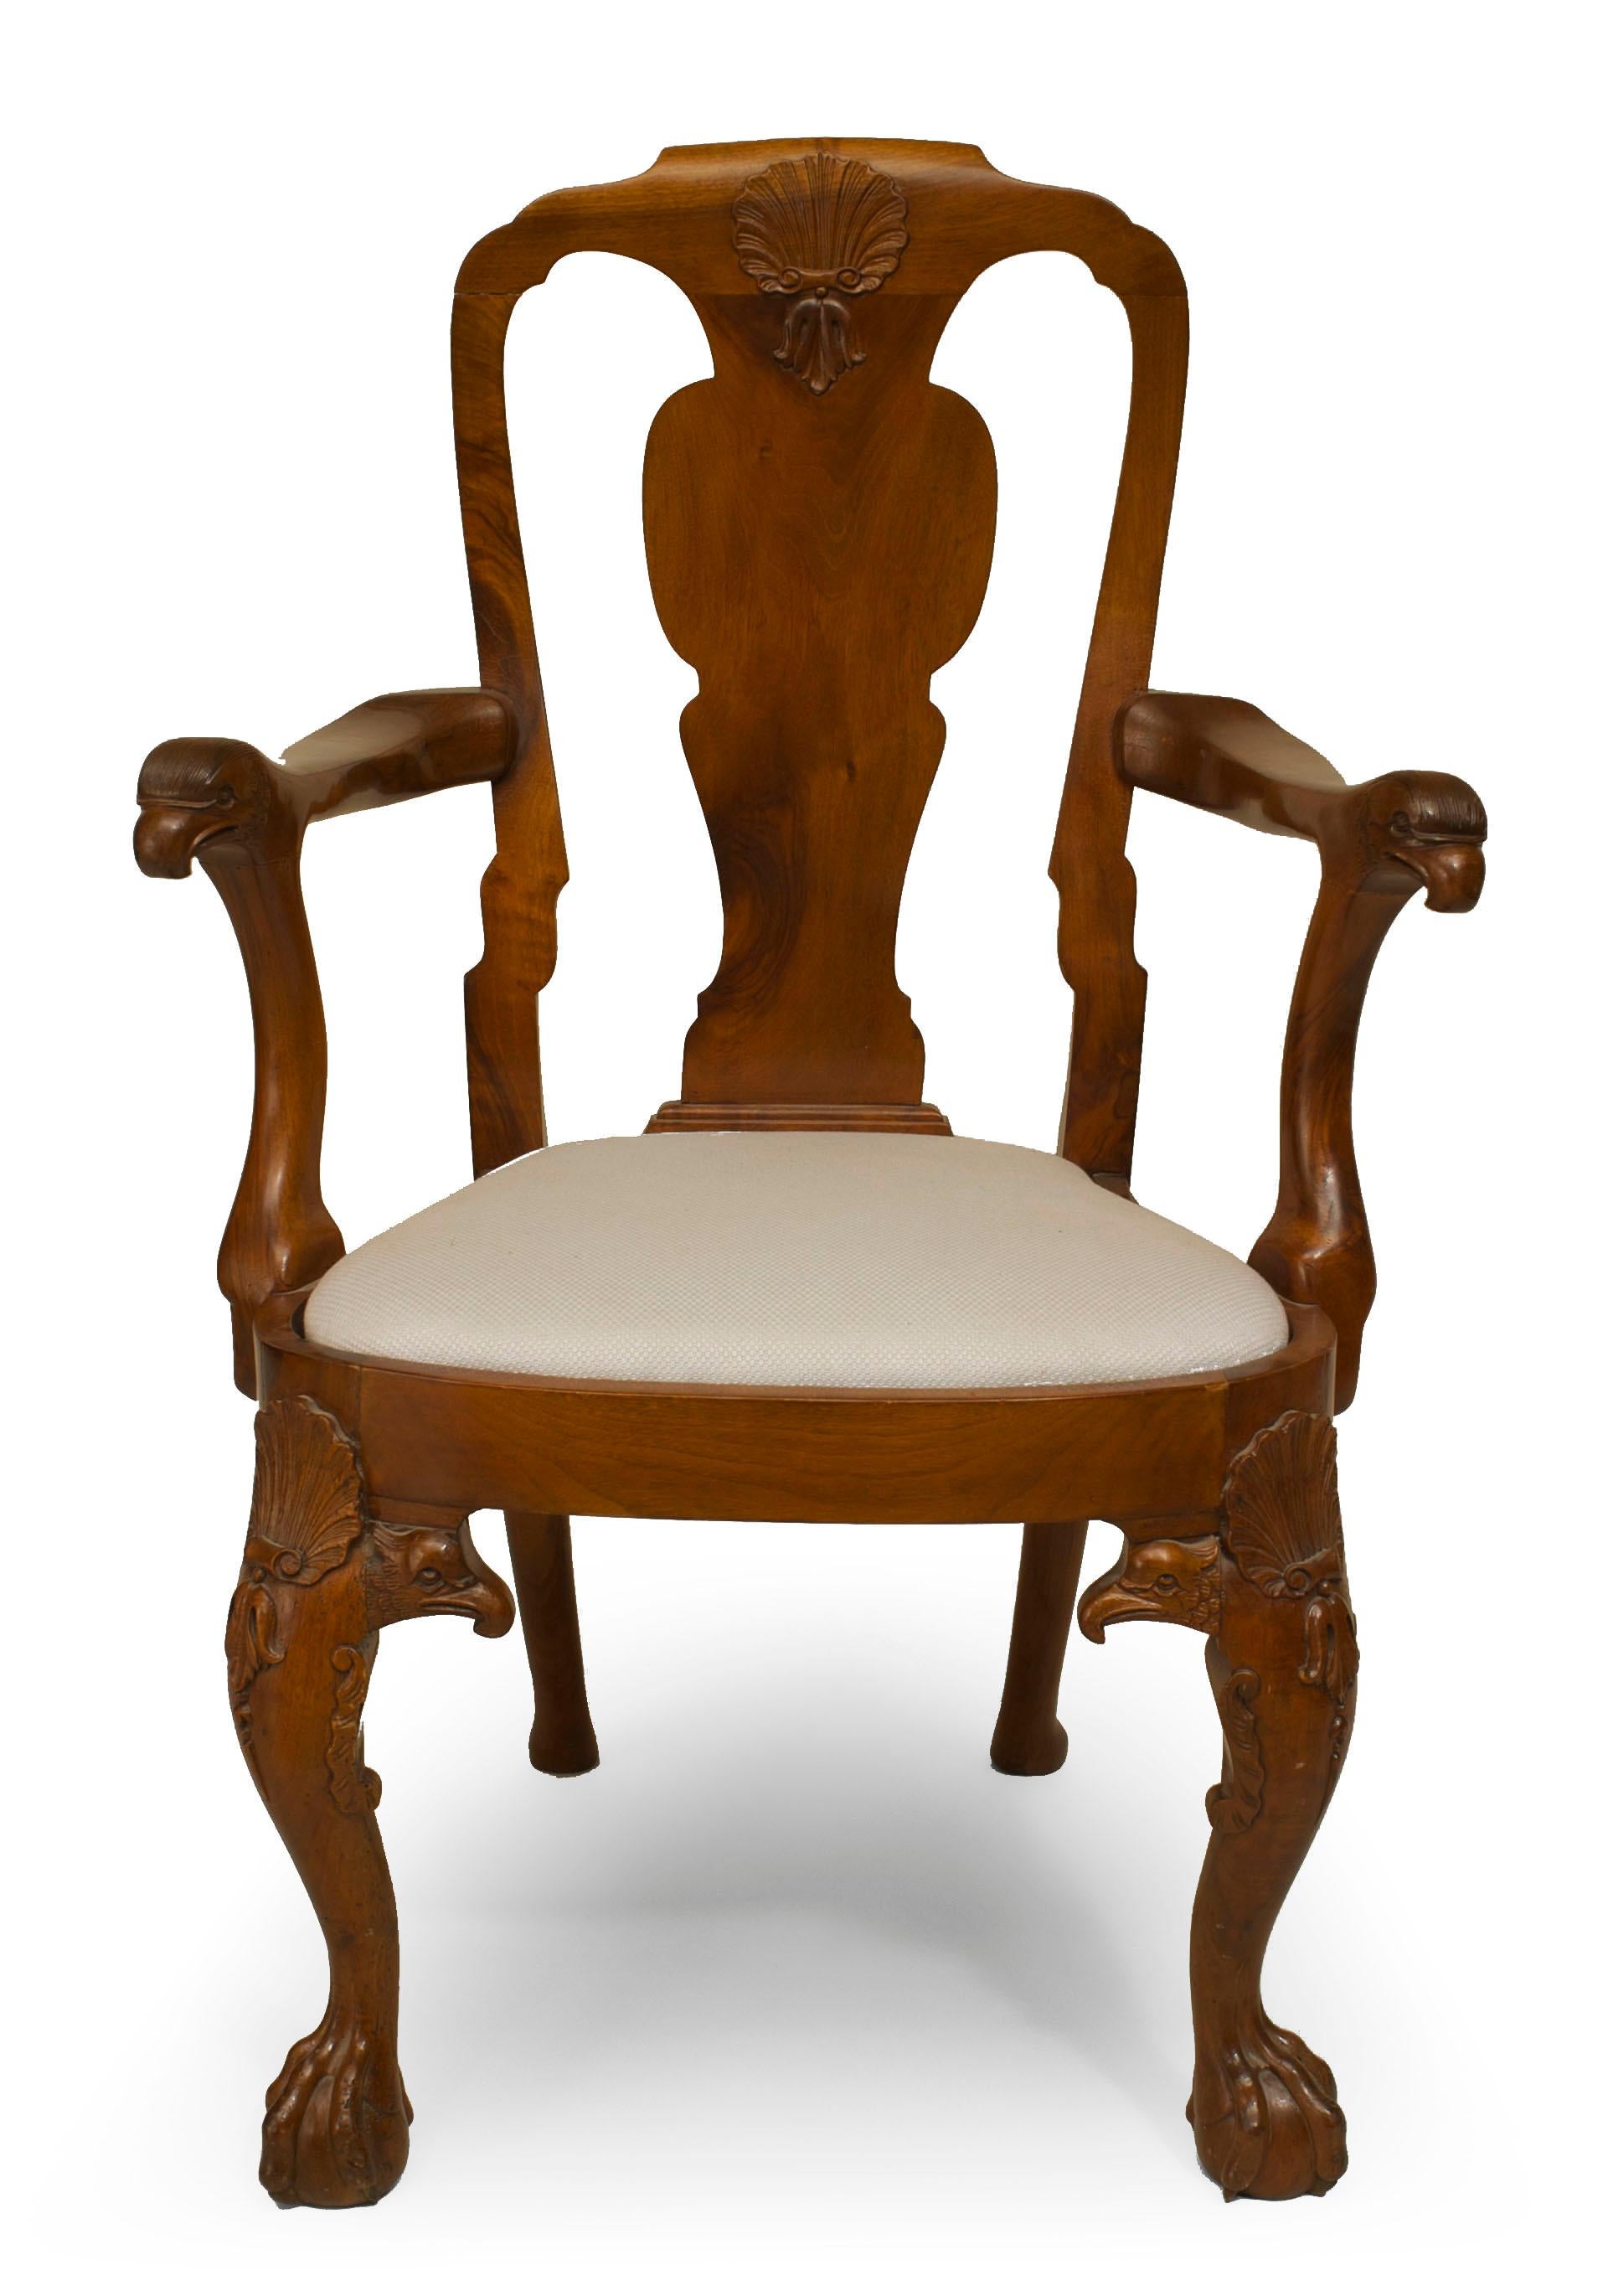 Pair of late 18th Century English Anglo-Indian George II padouk arm chairs with balloon slip seats and bellflower carved knees with a splat back having a decorative shell crest and bird head arms